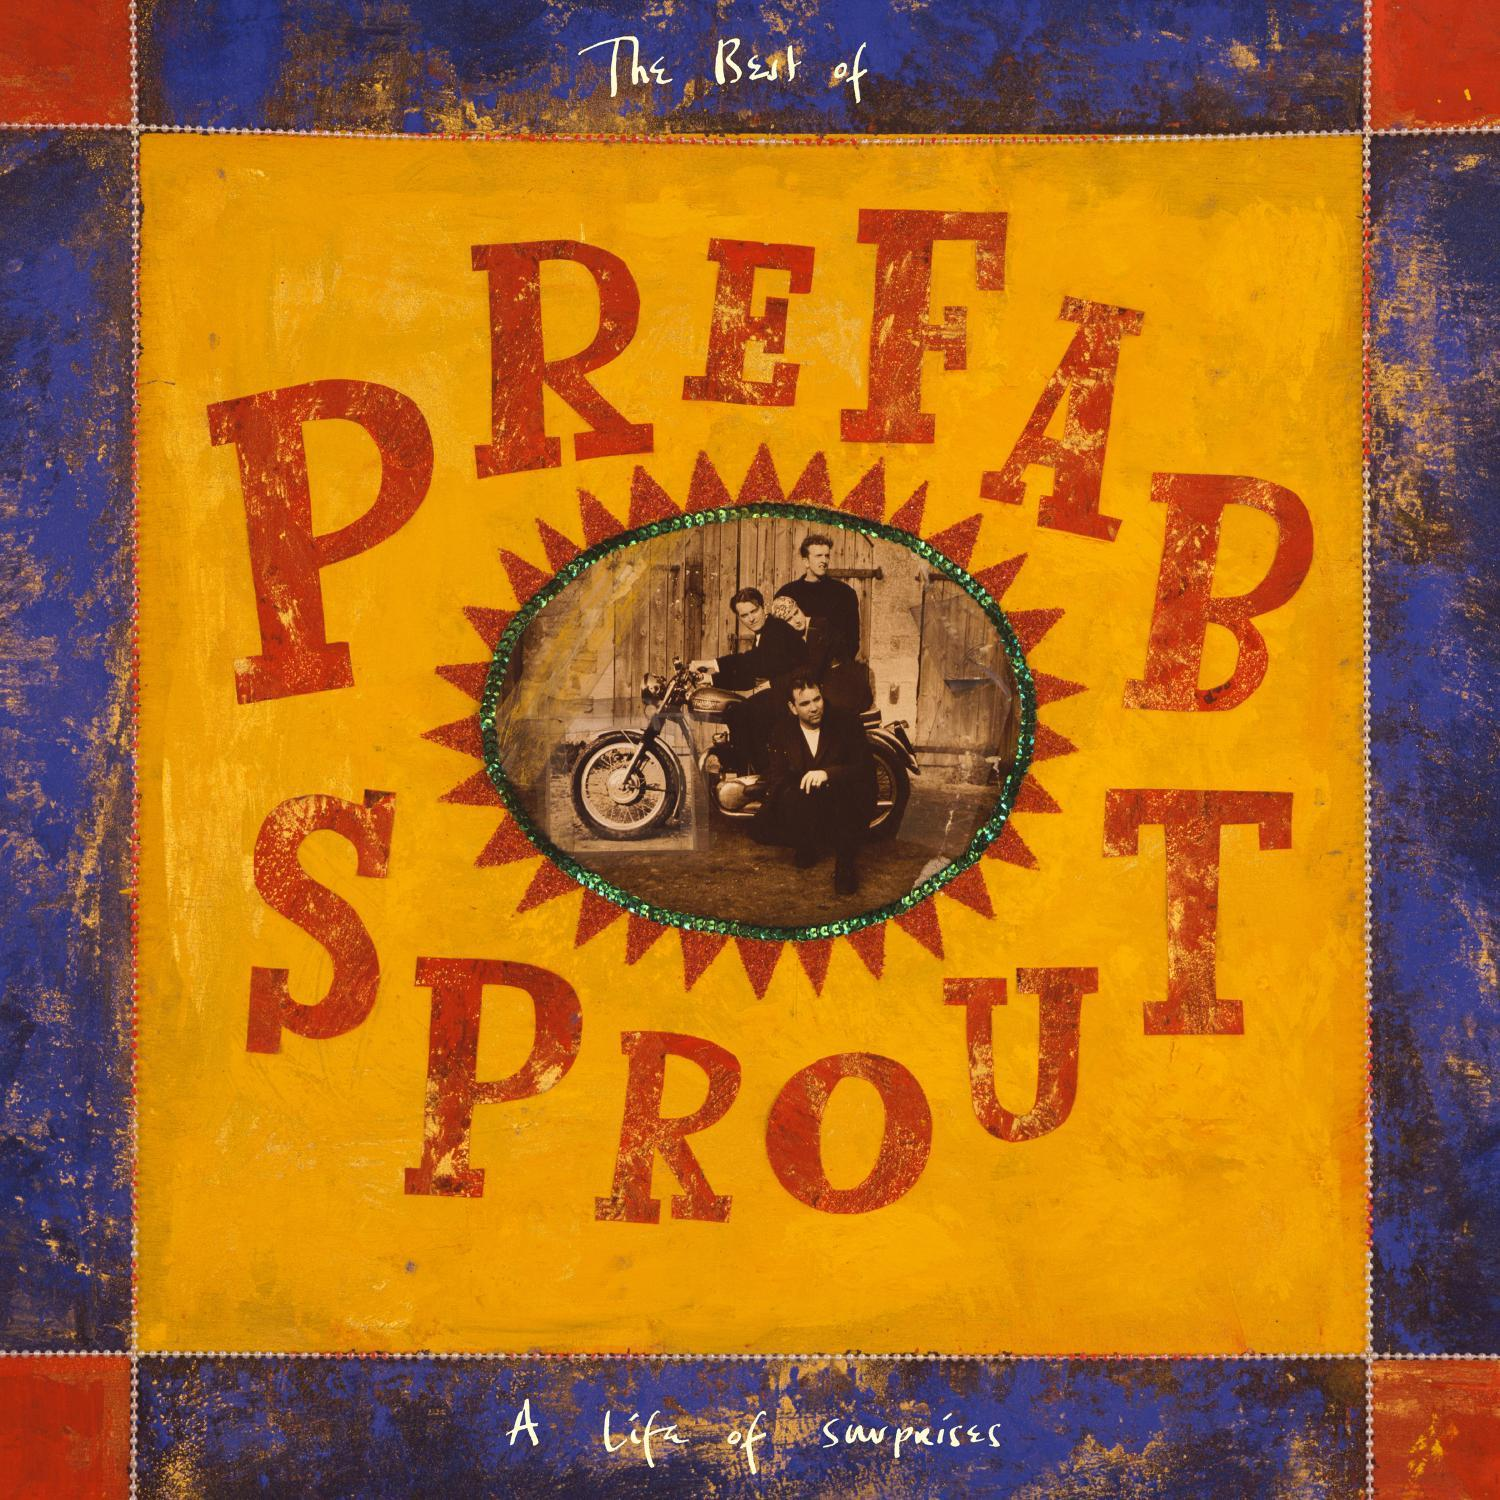 Prefab Sprout - A Life Surprises - of (Vinyl) (Remastered)